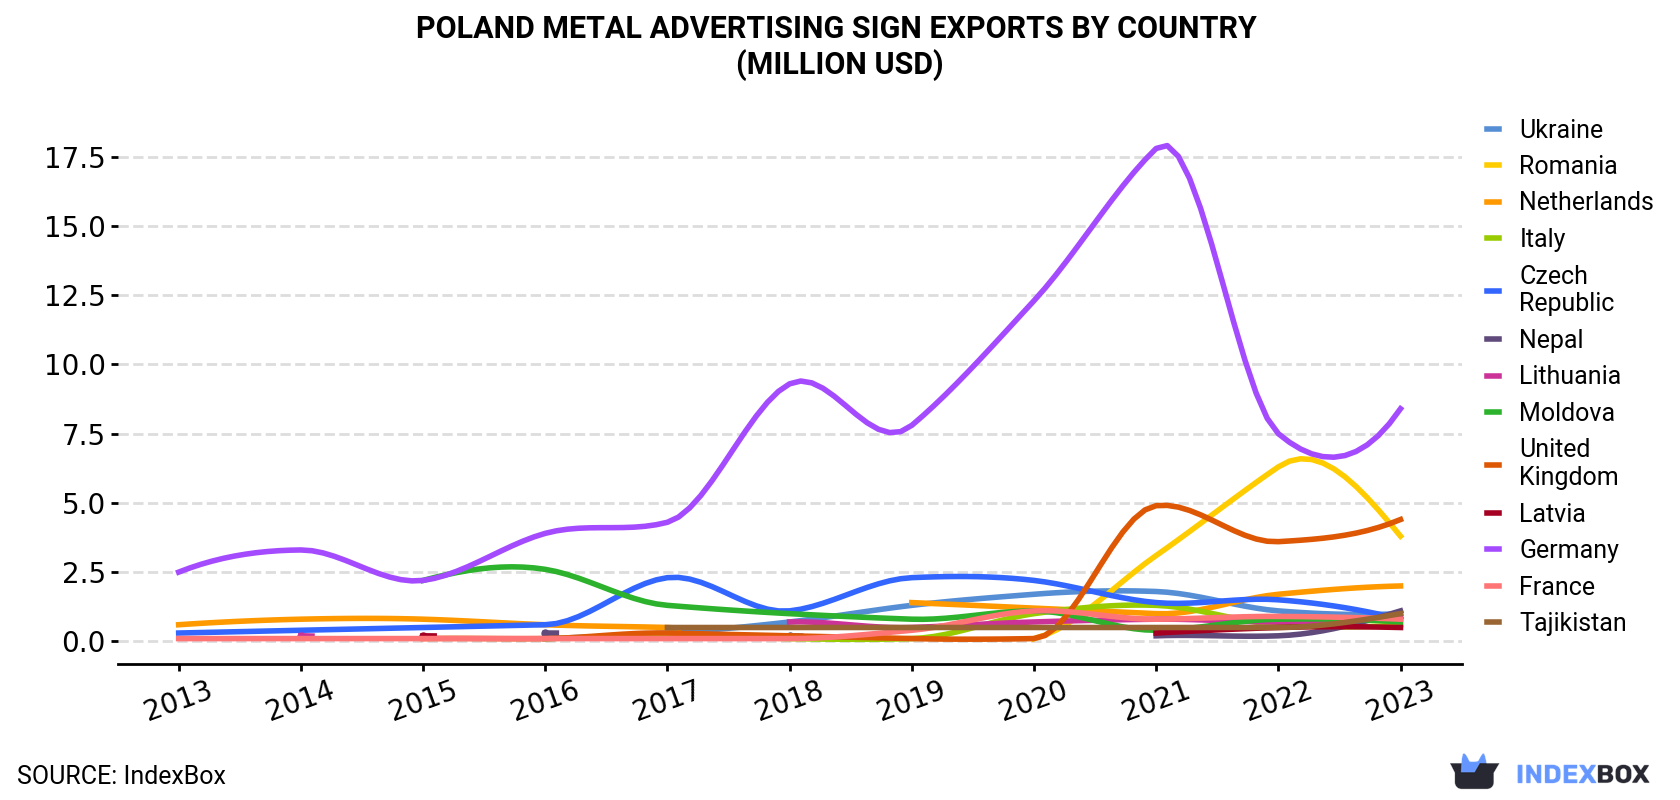 Poland Metal Advertising Sign Exports By Country (Million USD)